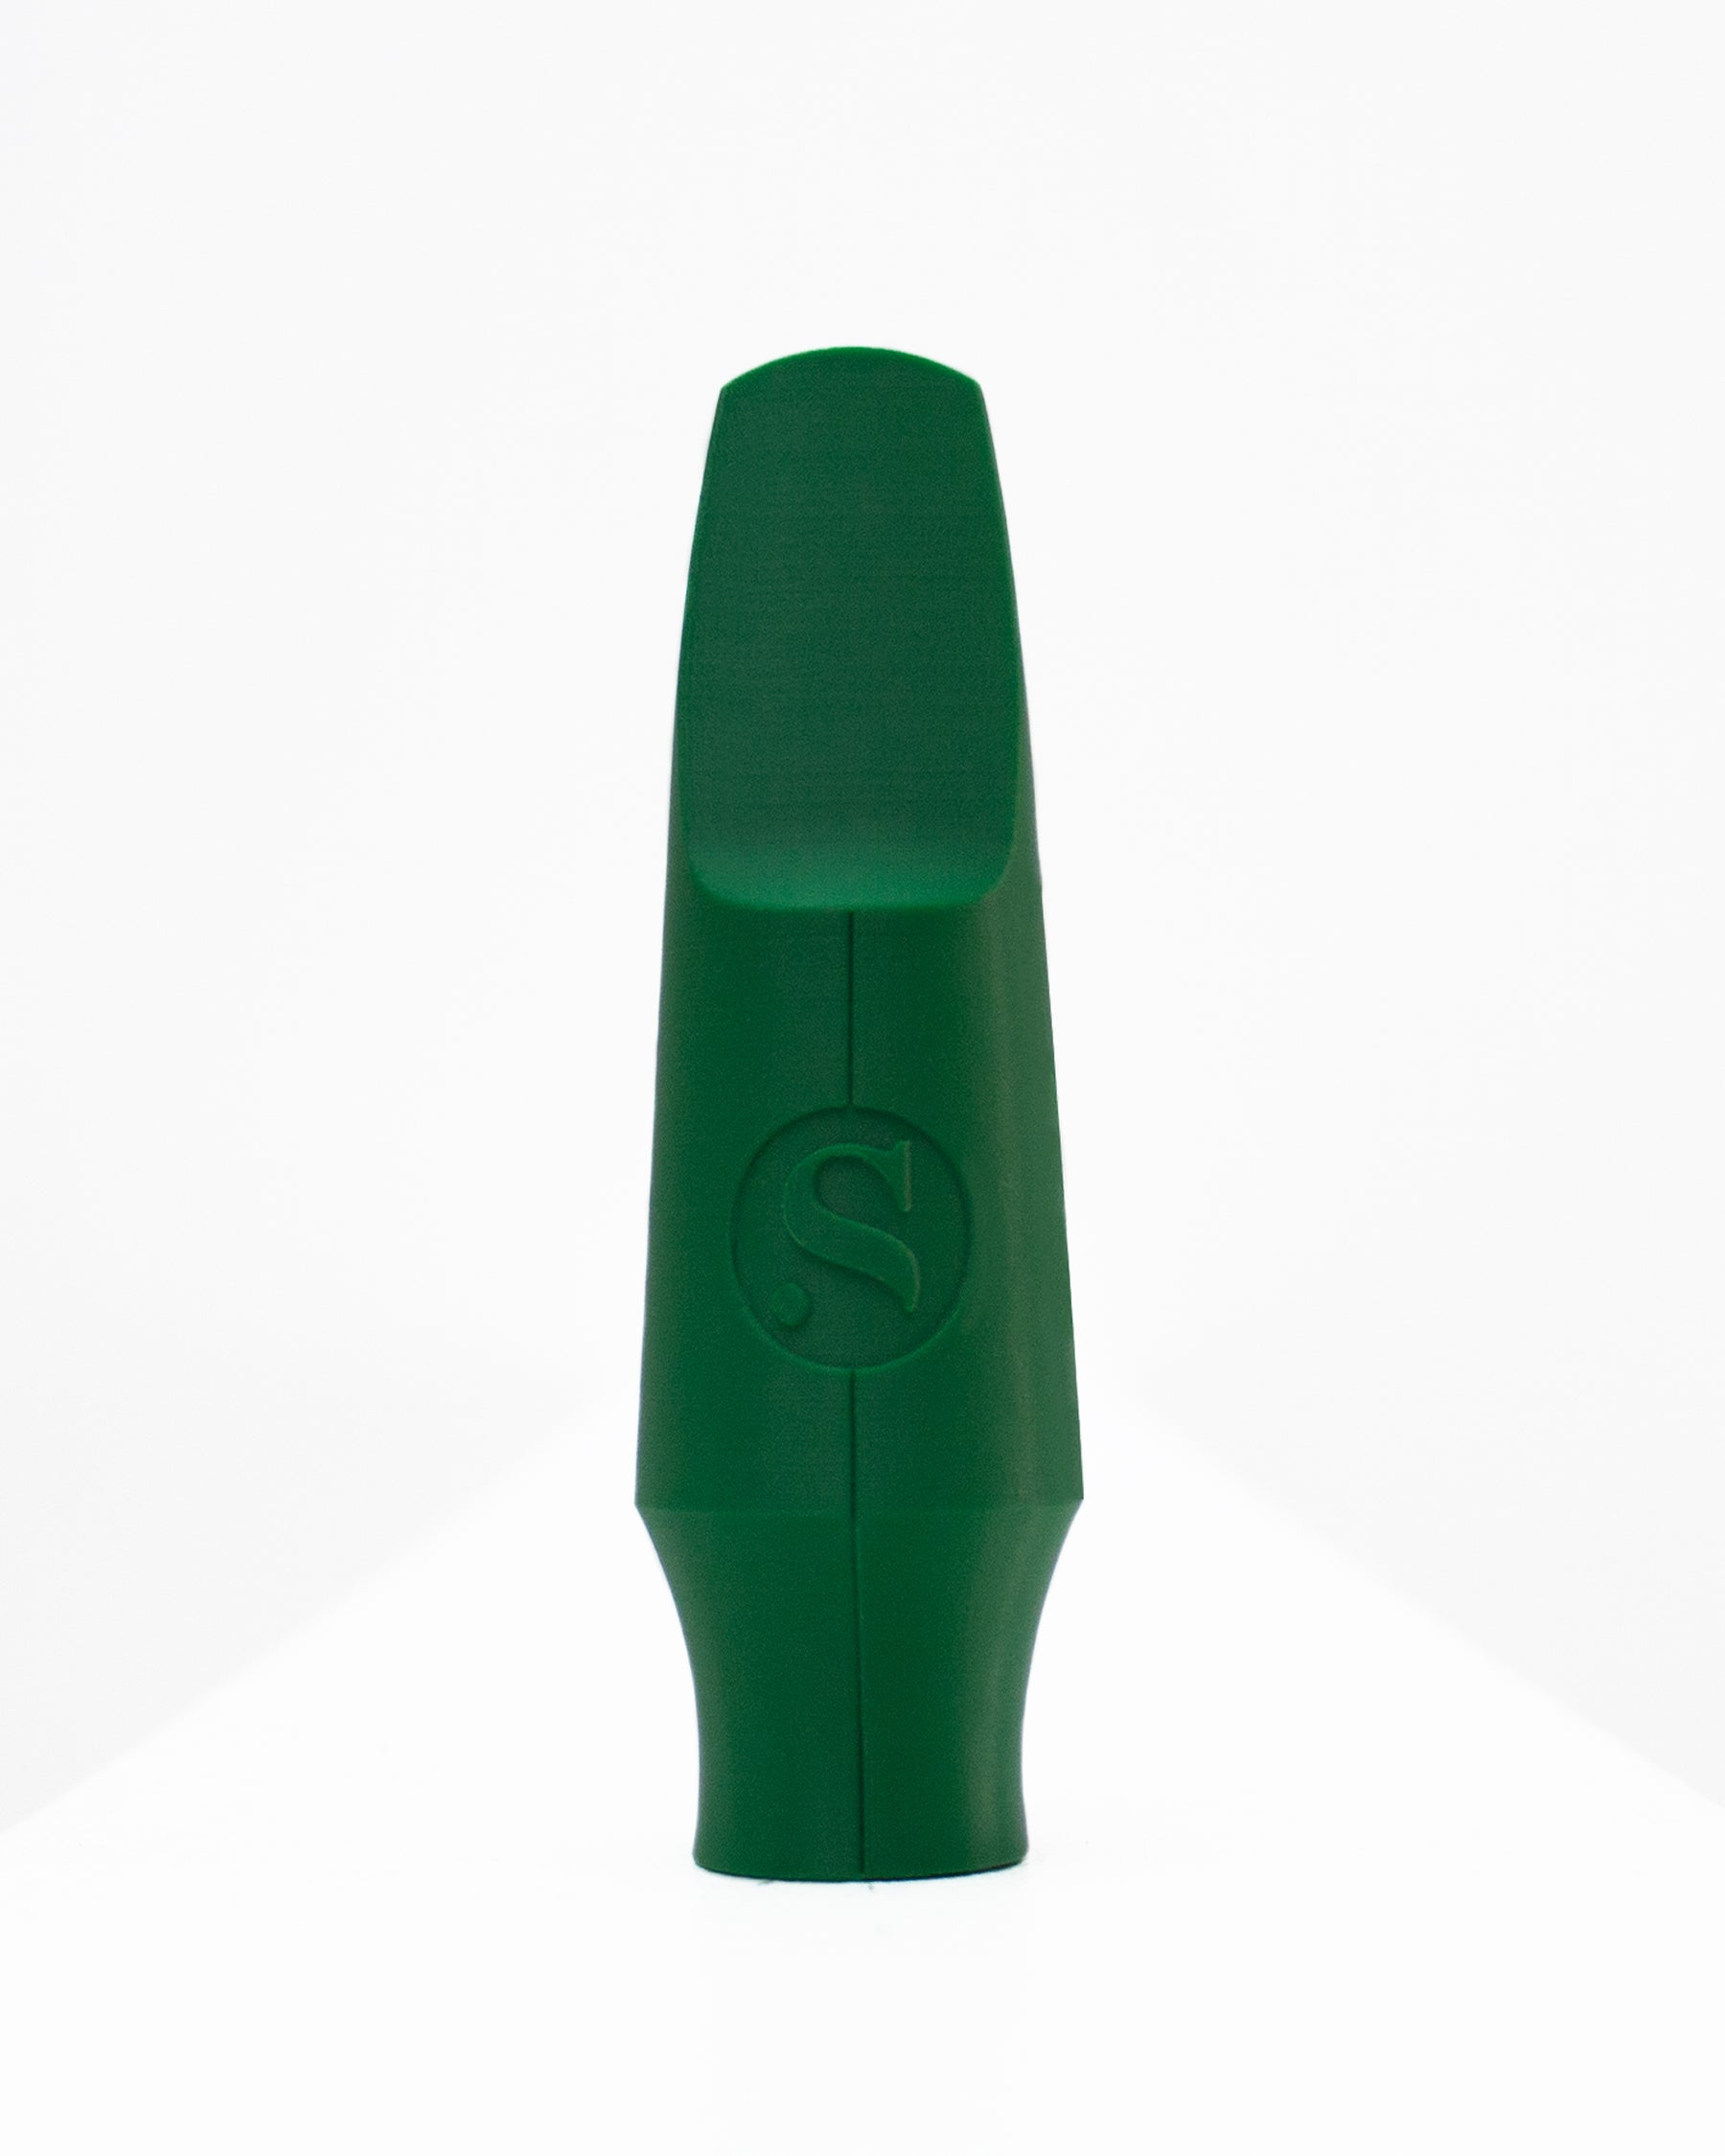 Tenor Signature Saxophone mouthpiece - Dan Forshaw by Syos - 9 / Forest Green